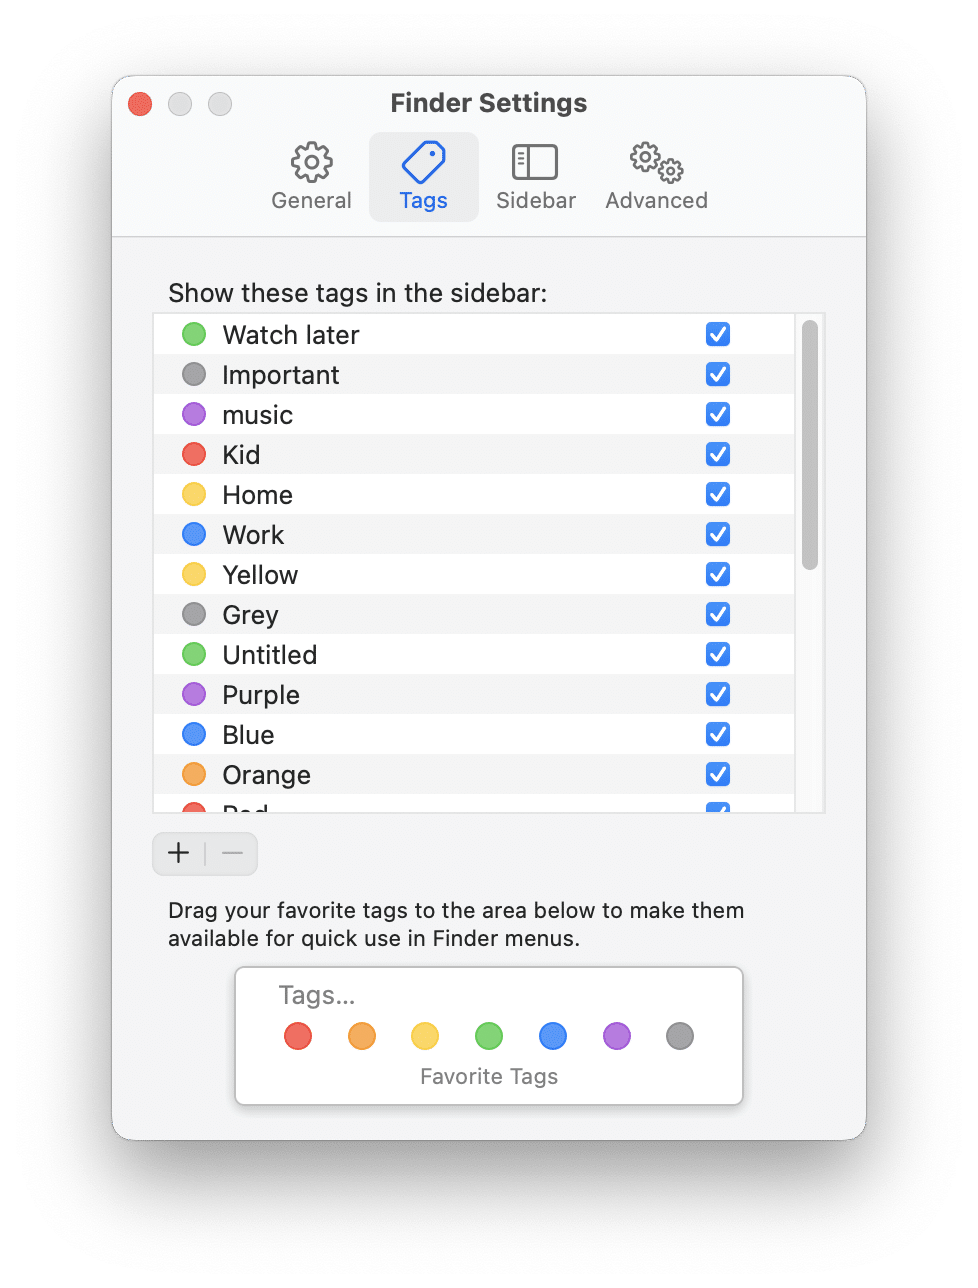 Tags tab in Finder Settings